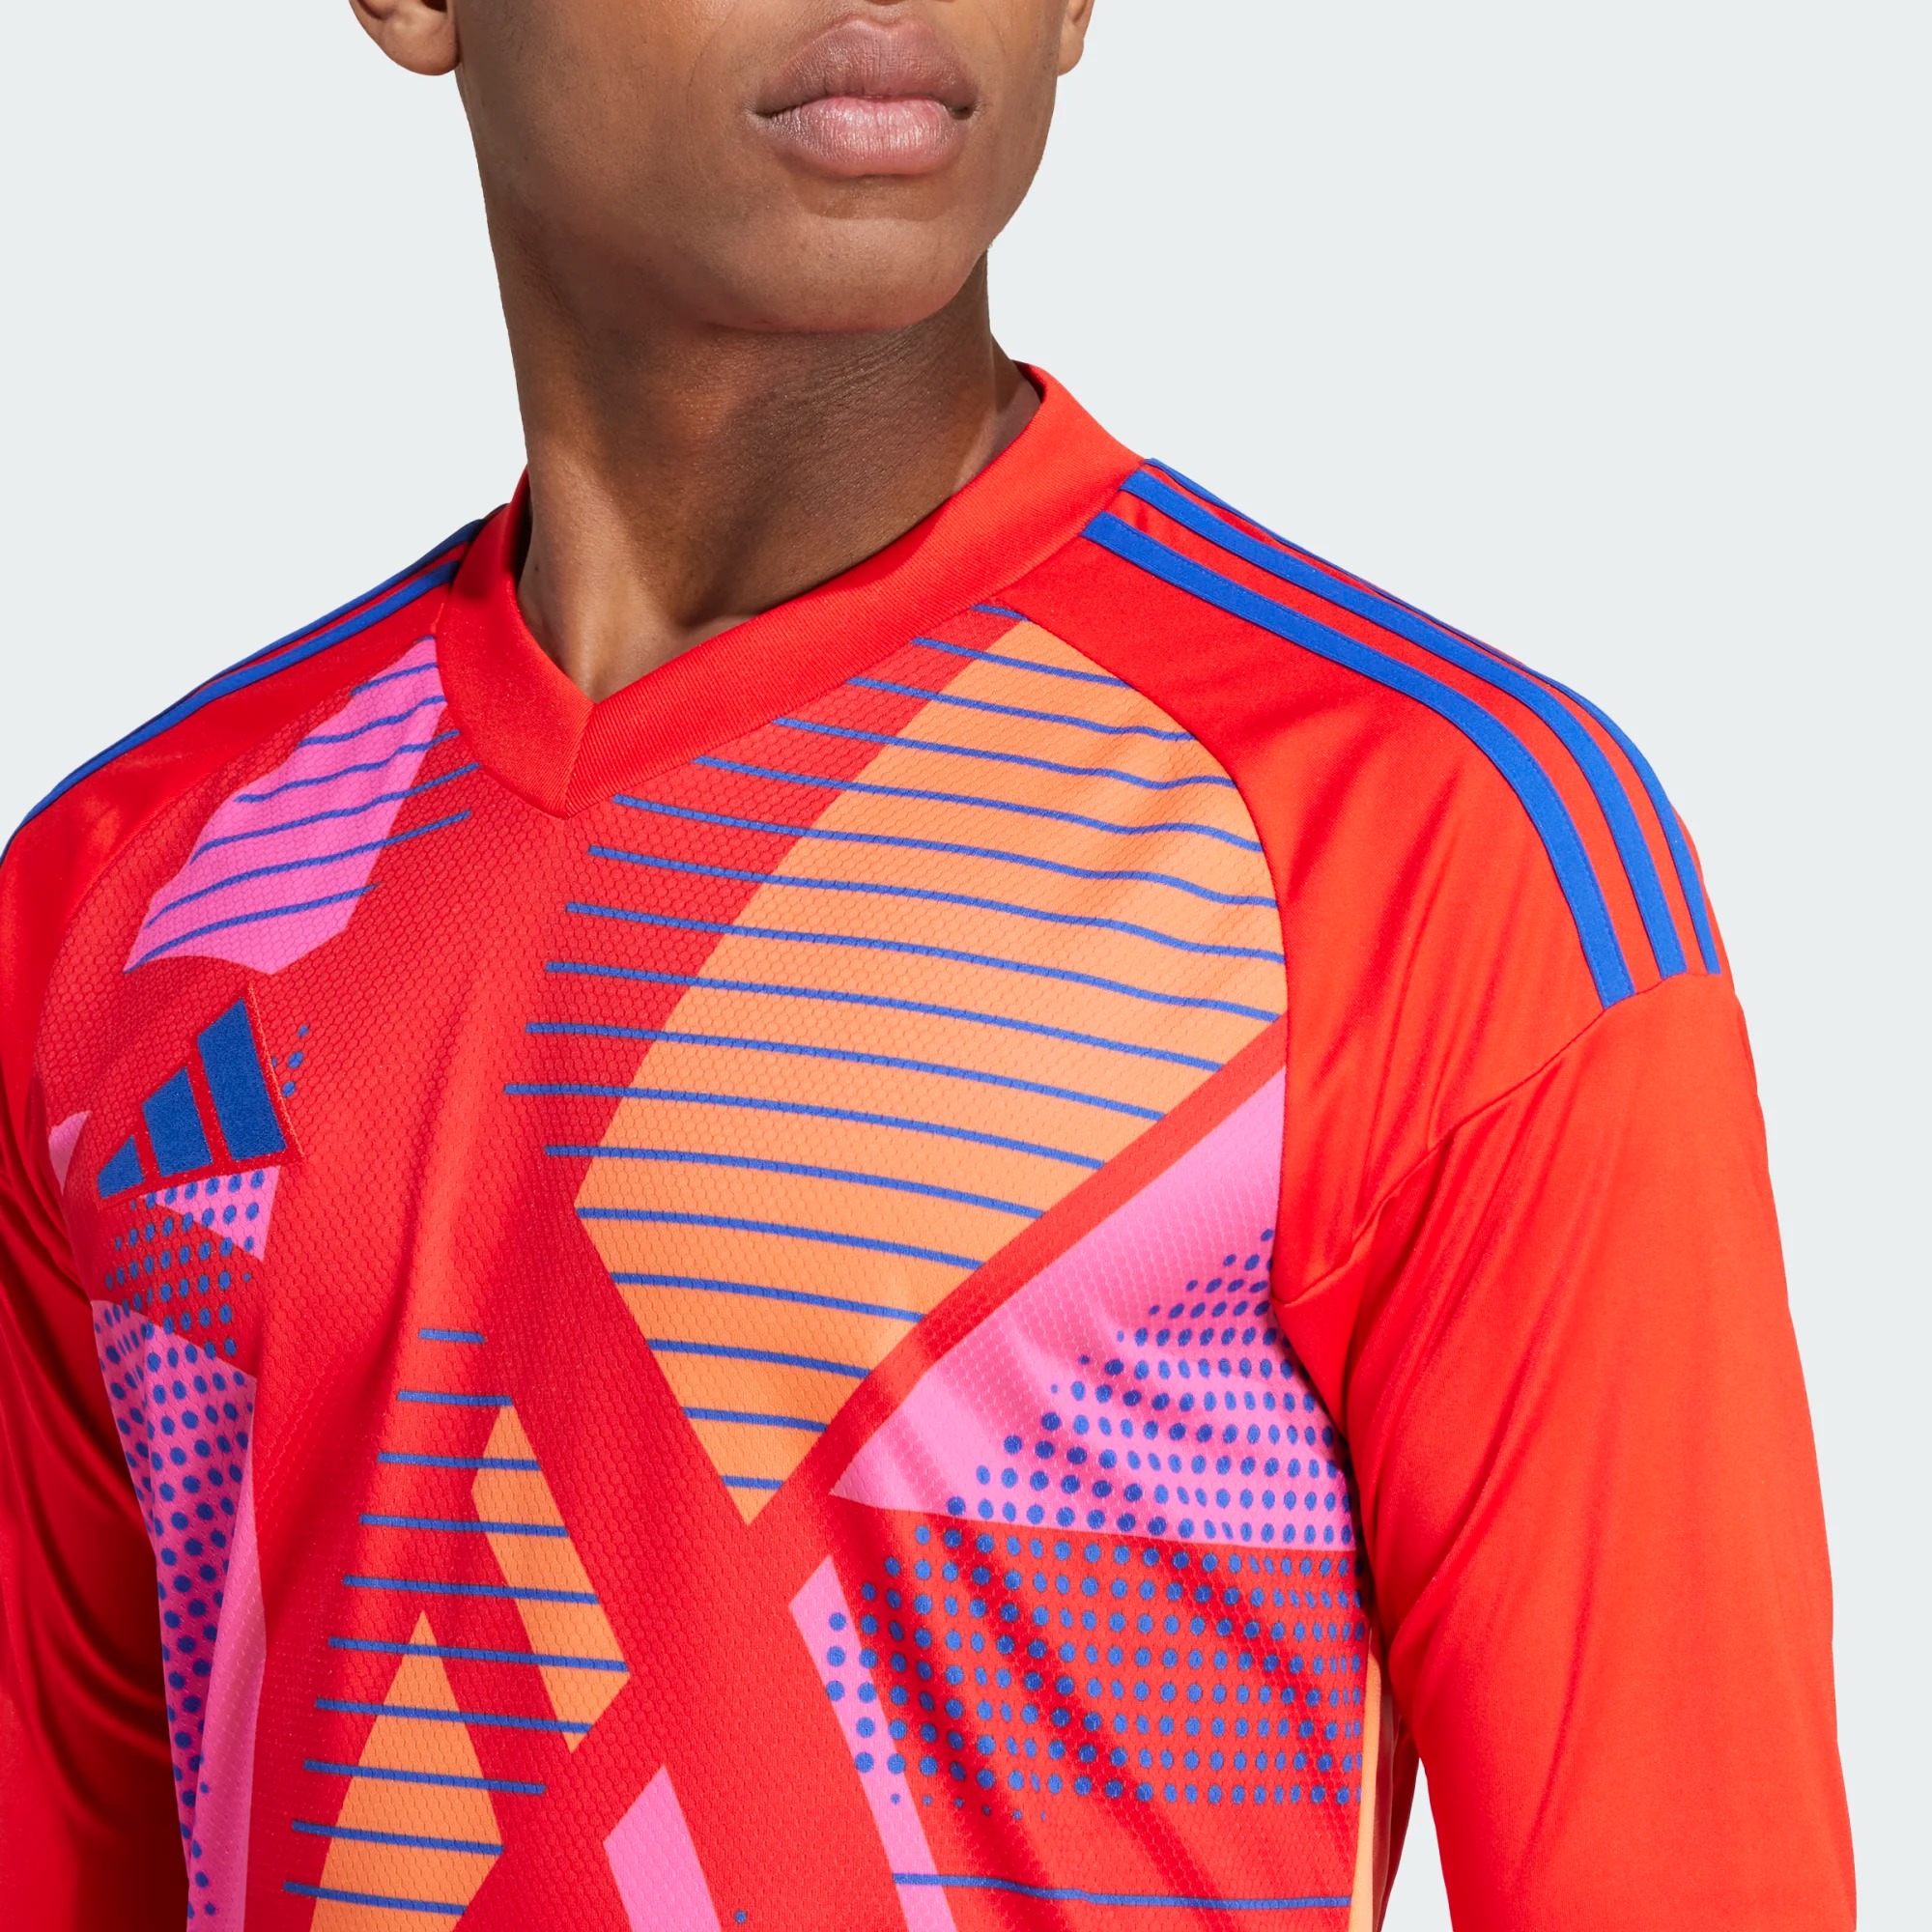 ADIDAS TIRO24 COMPETITION GK JERSEY LS RED